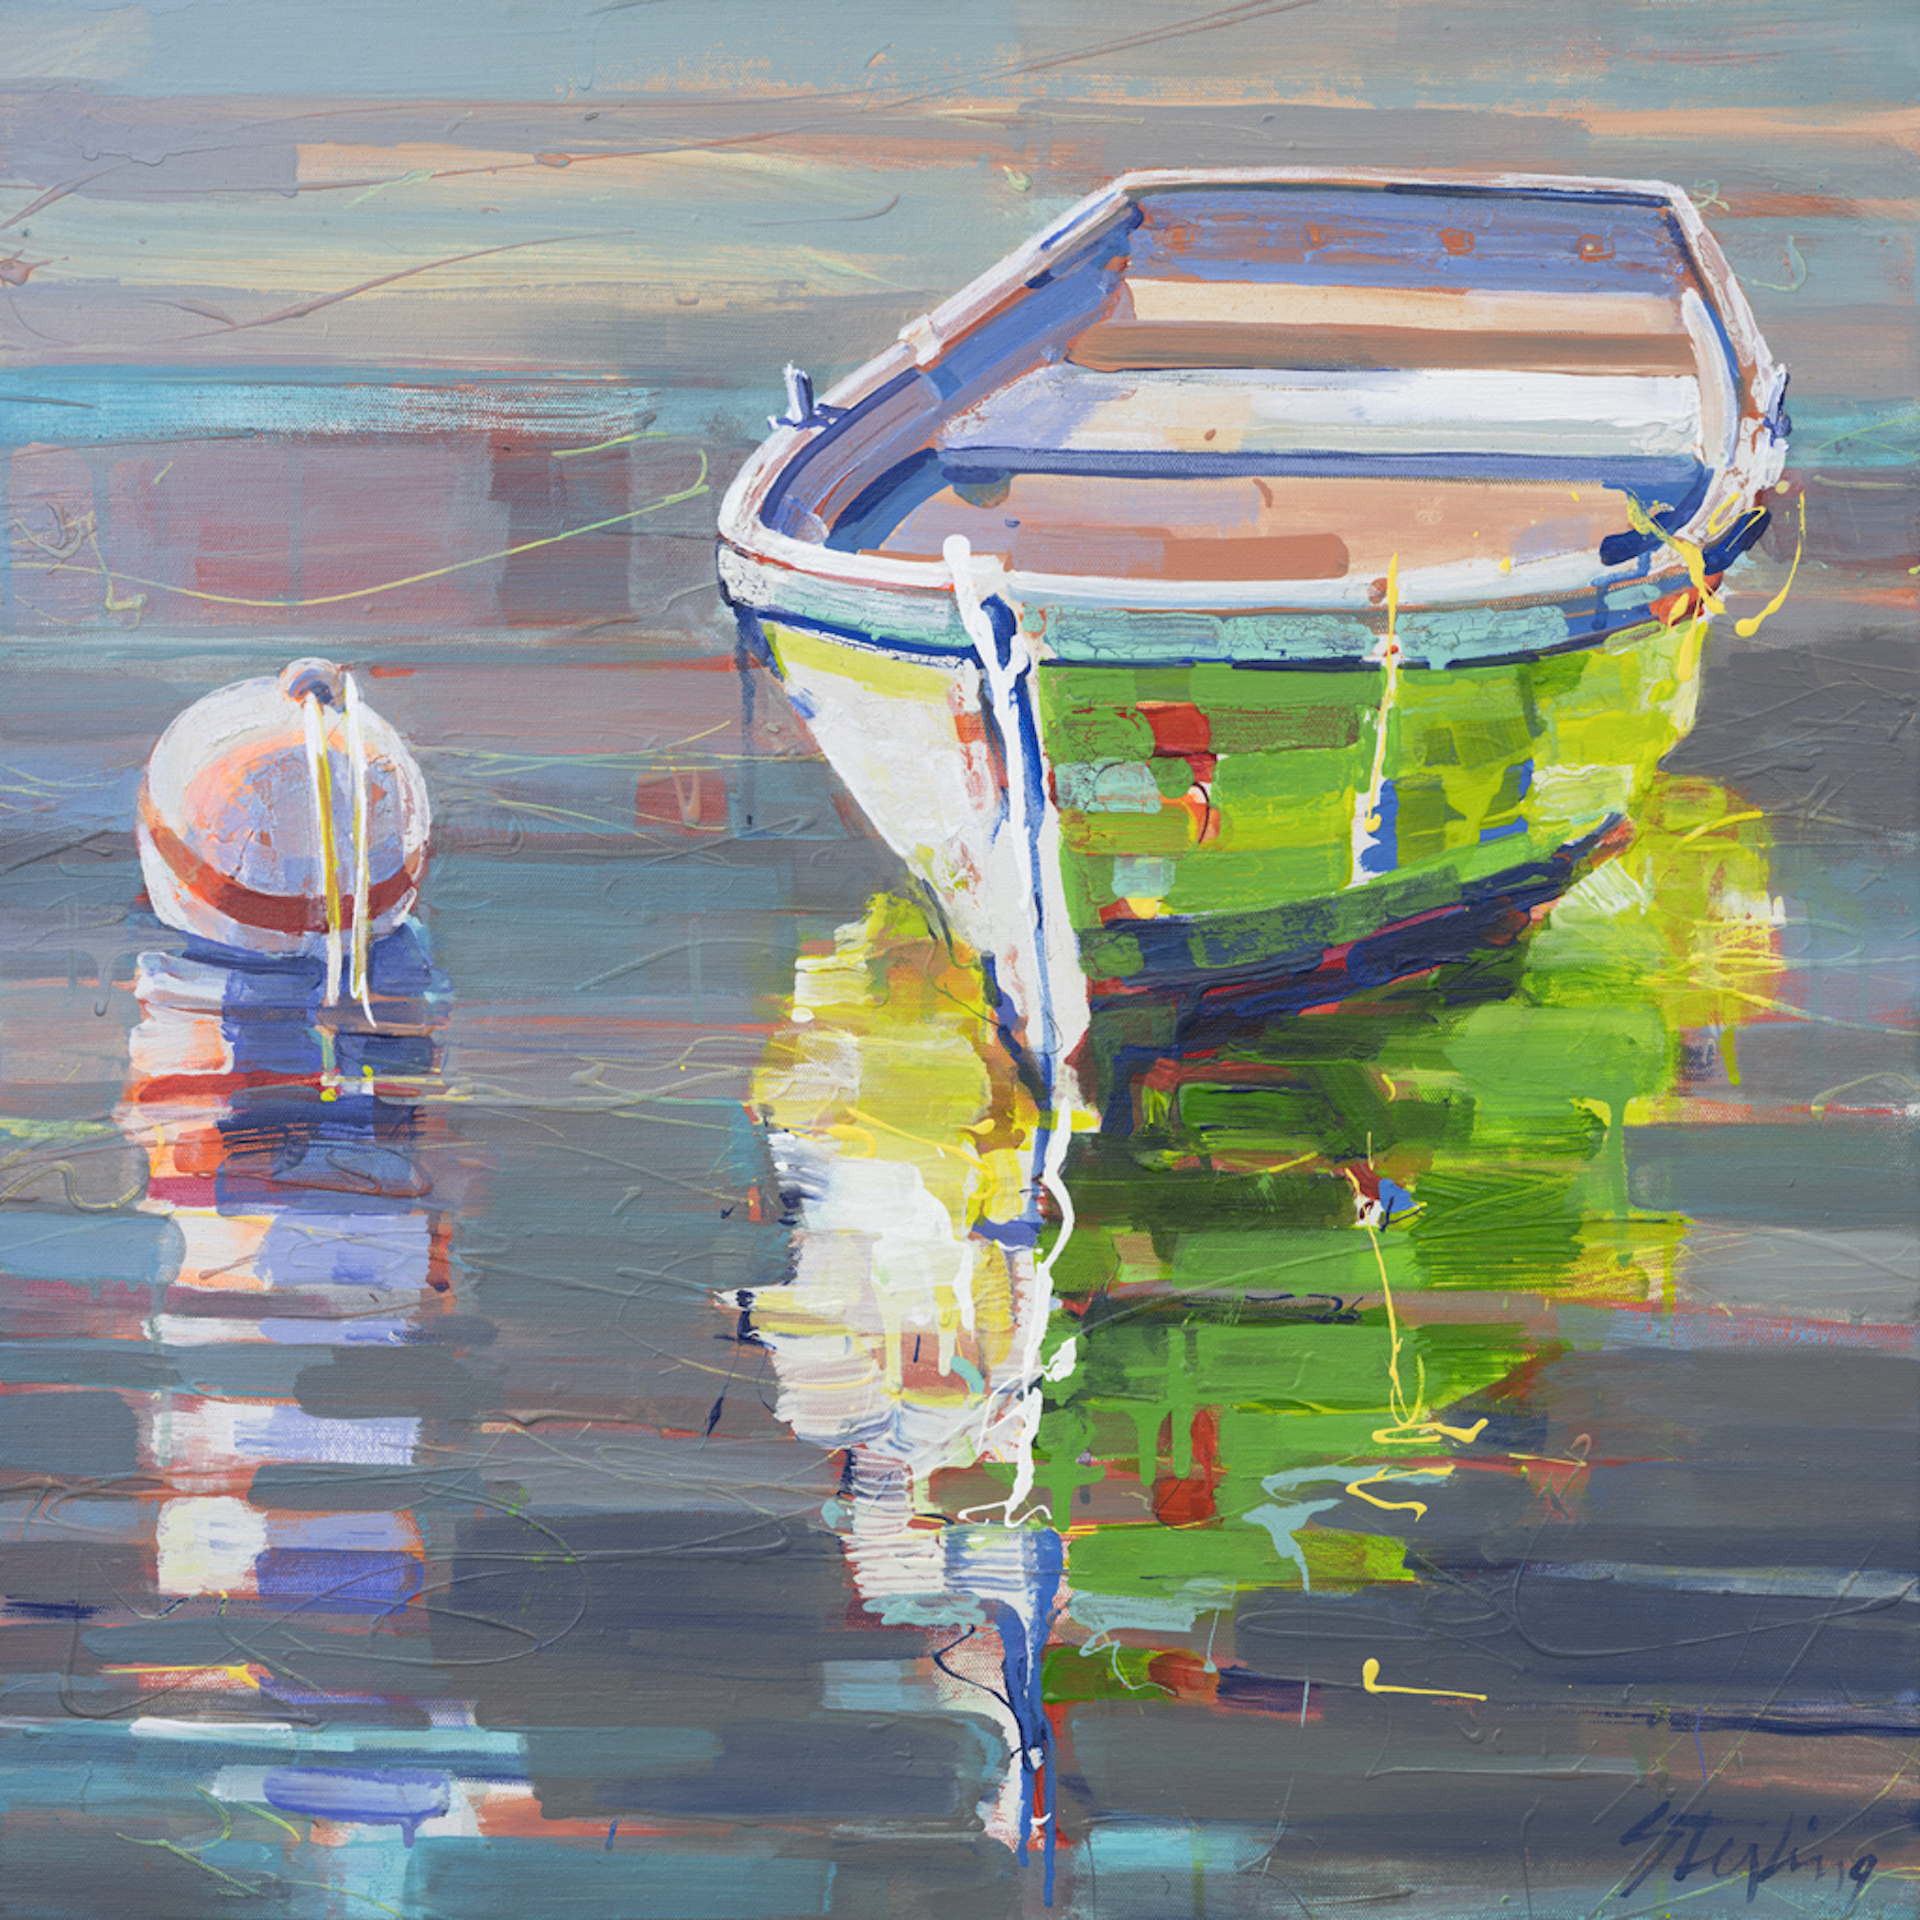 Pea Green Boat
24x24 SOLD
acrylic on canvas